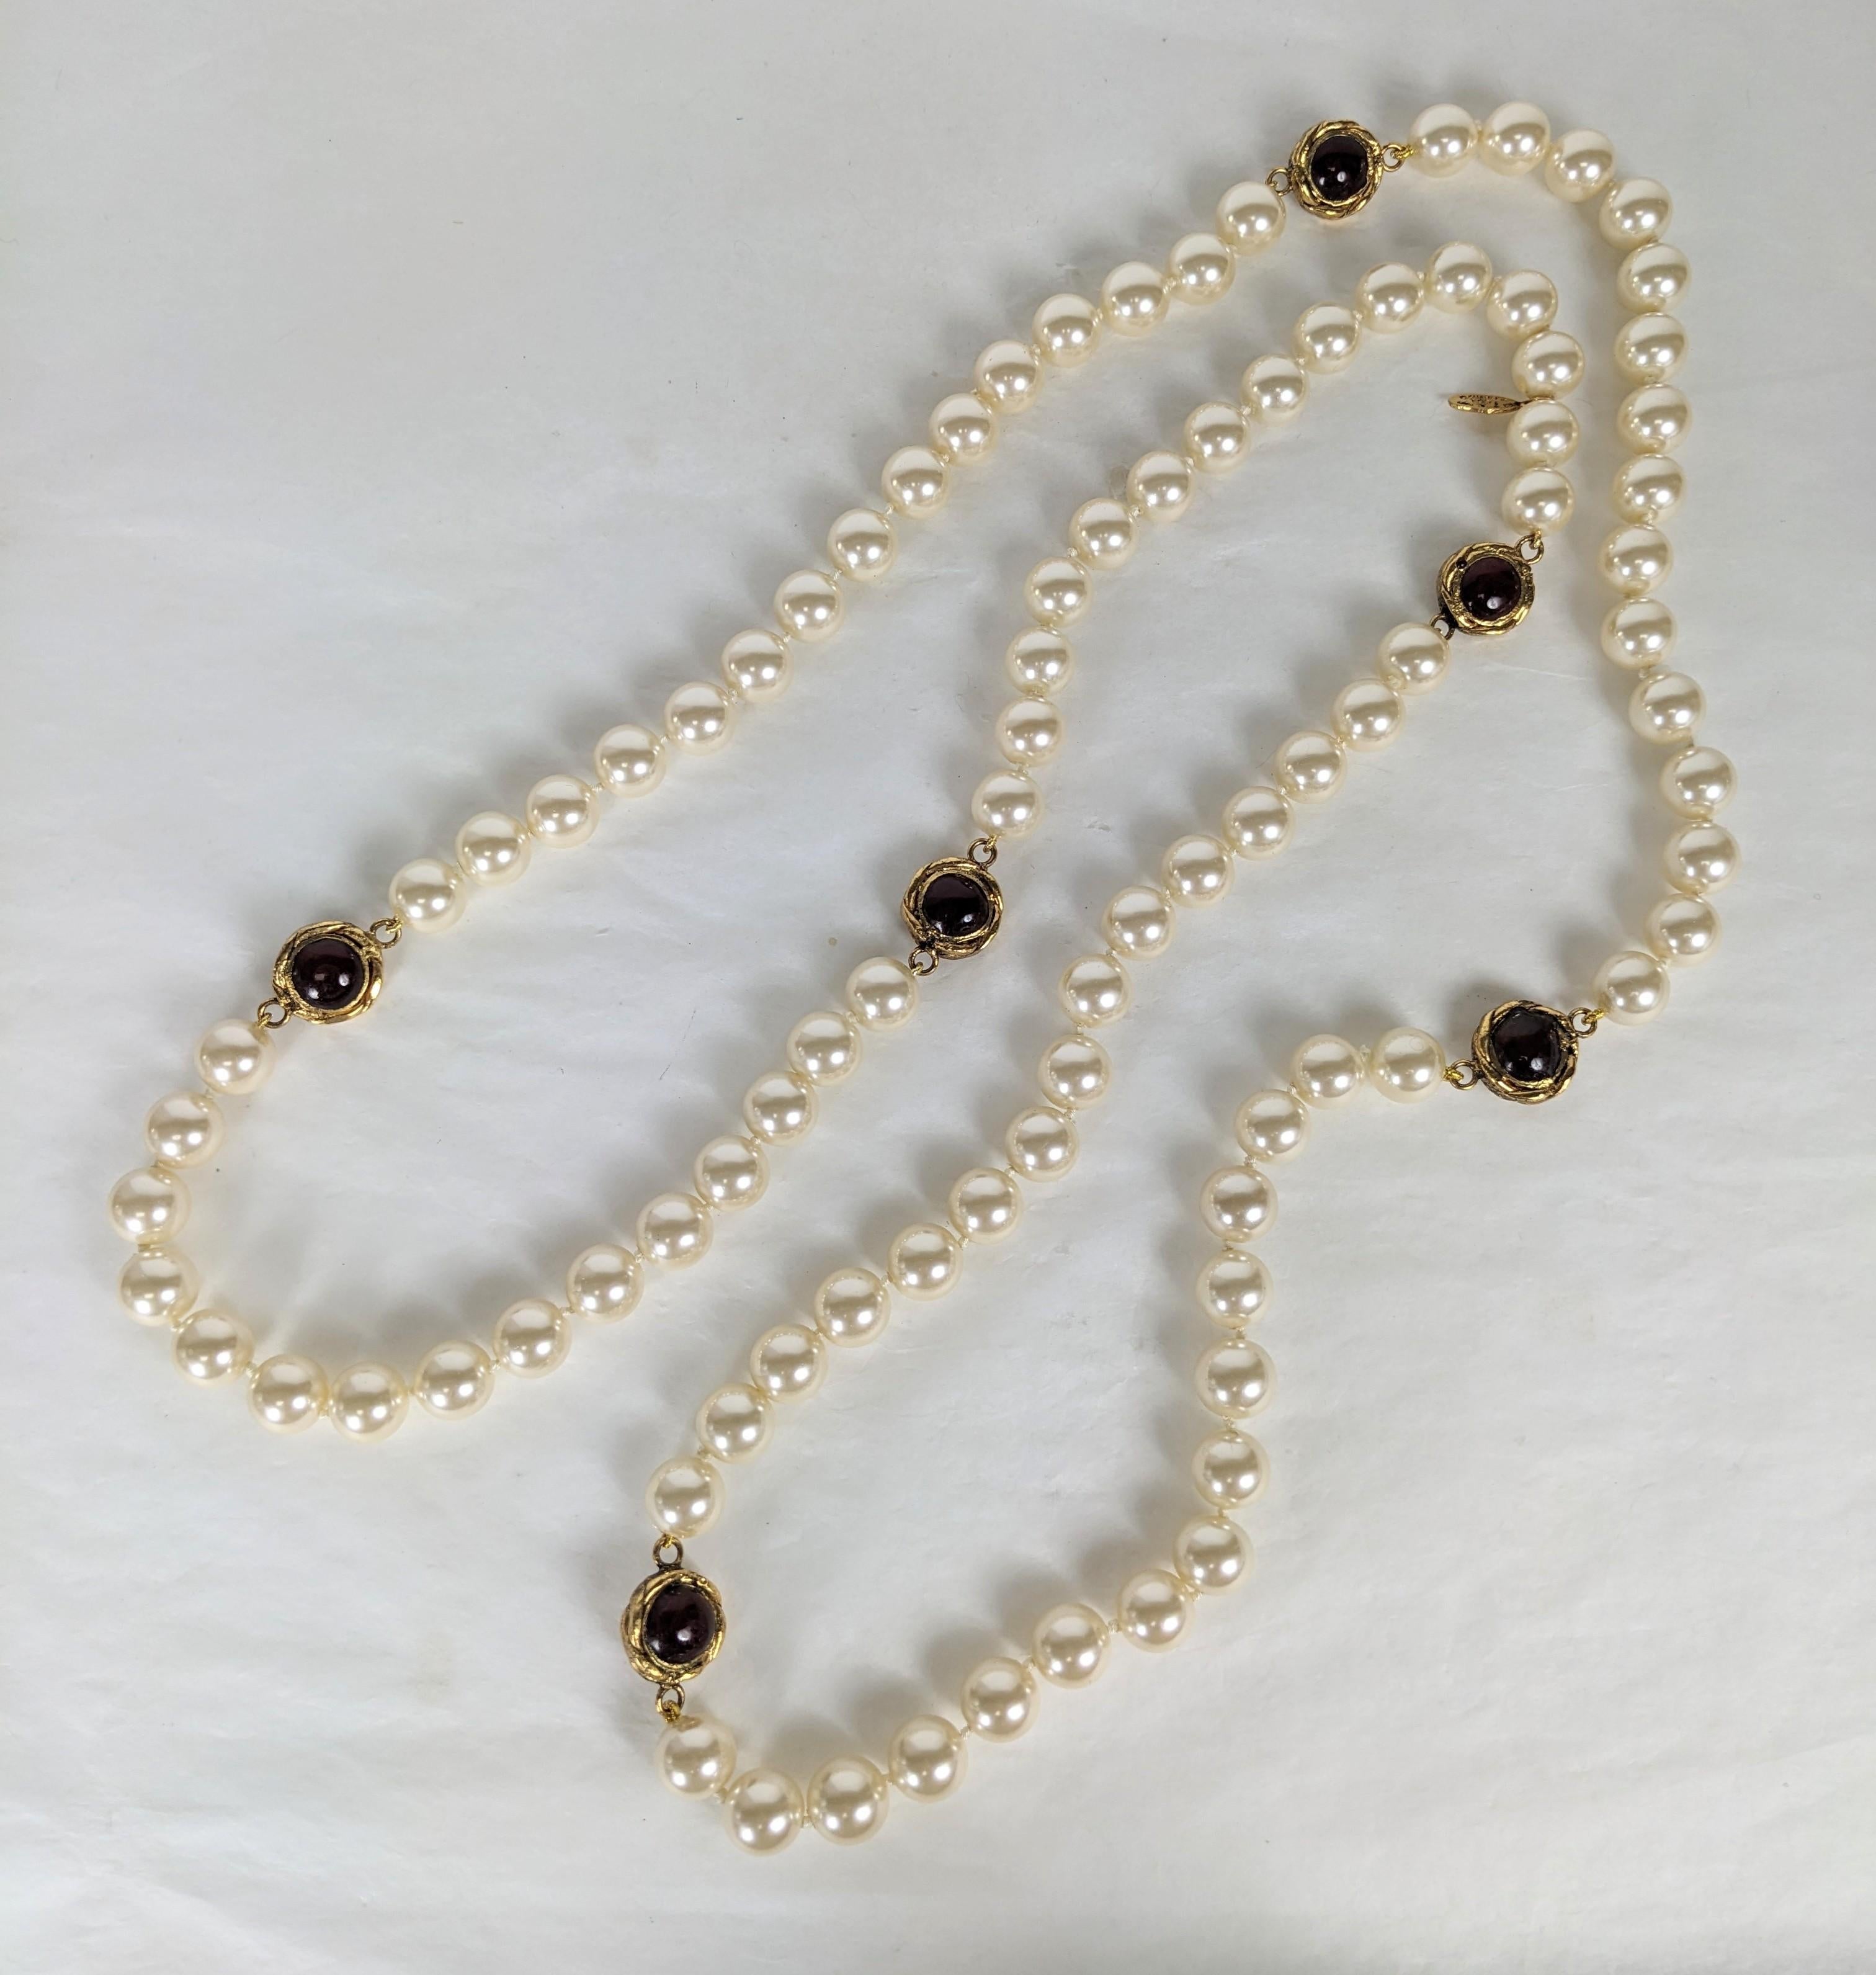 Chanel Maison Gripoix Poured Glass Ruby Link Pearl Necklace In Excellent Condition For Sale In New York, NY